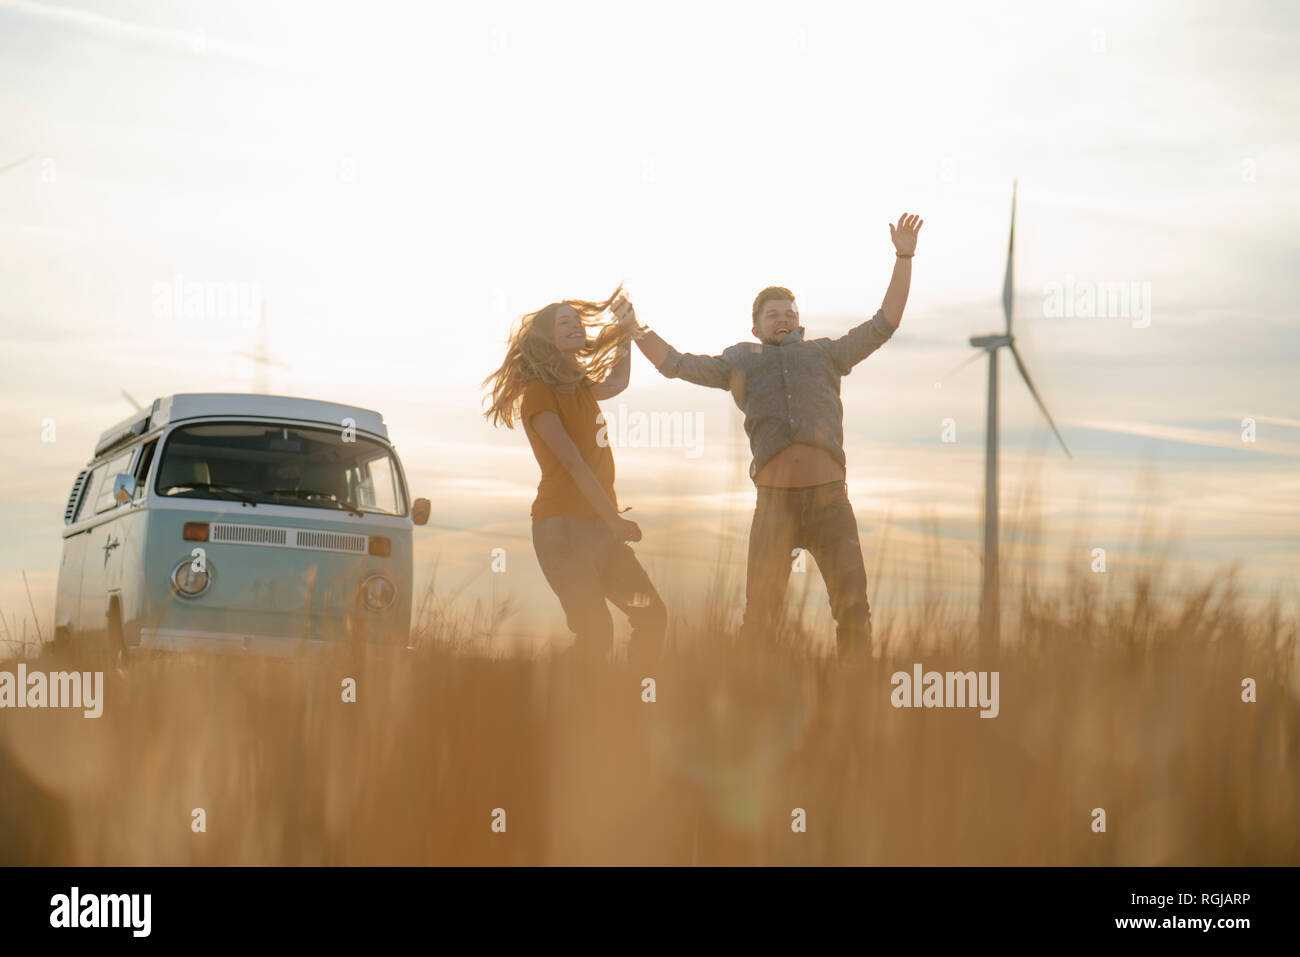 Exuberant couple at camper van in rural landscape with wind turbine in background Stock Photo